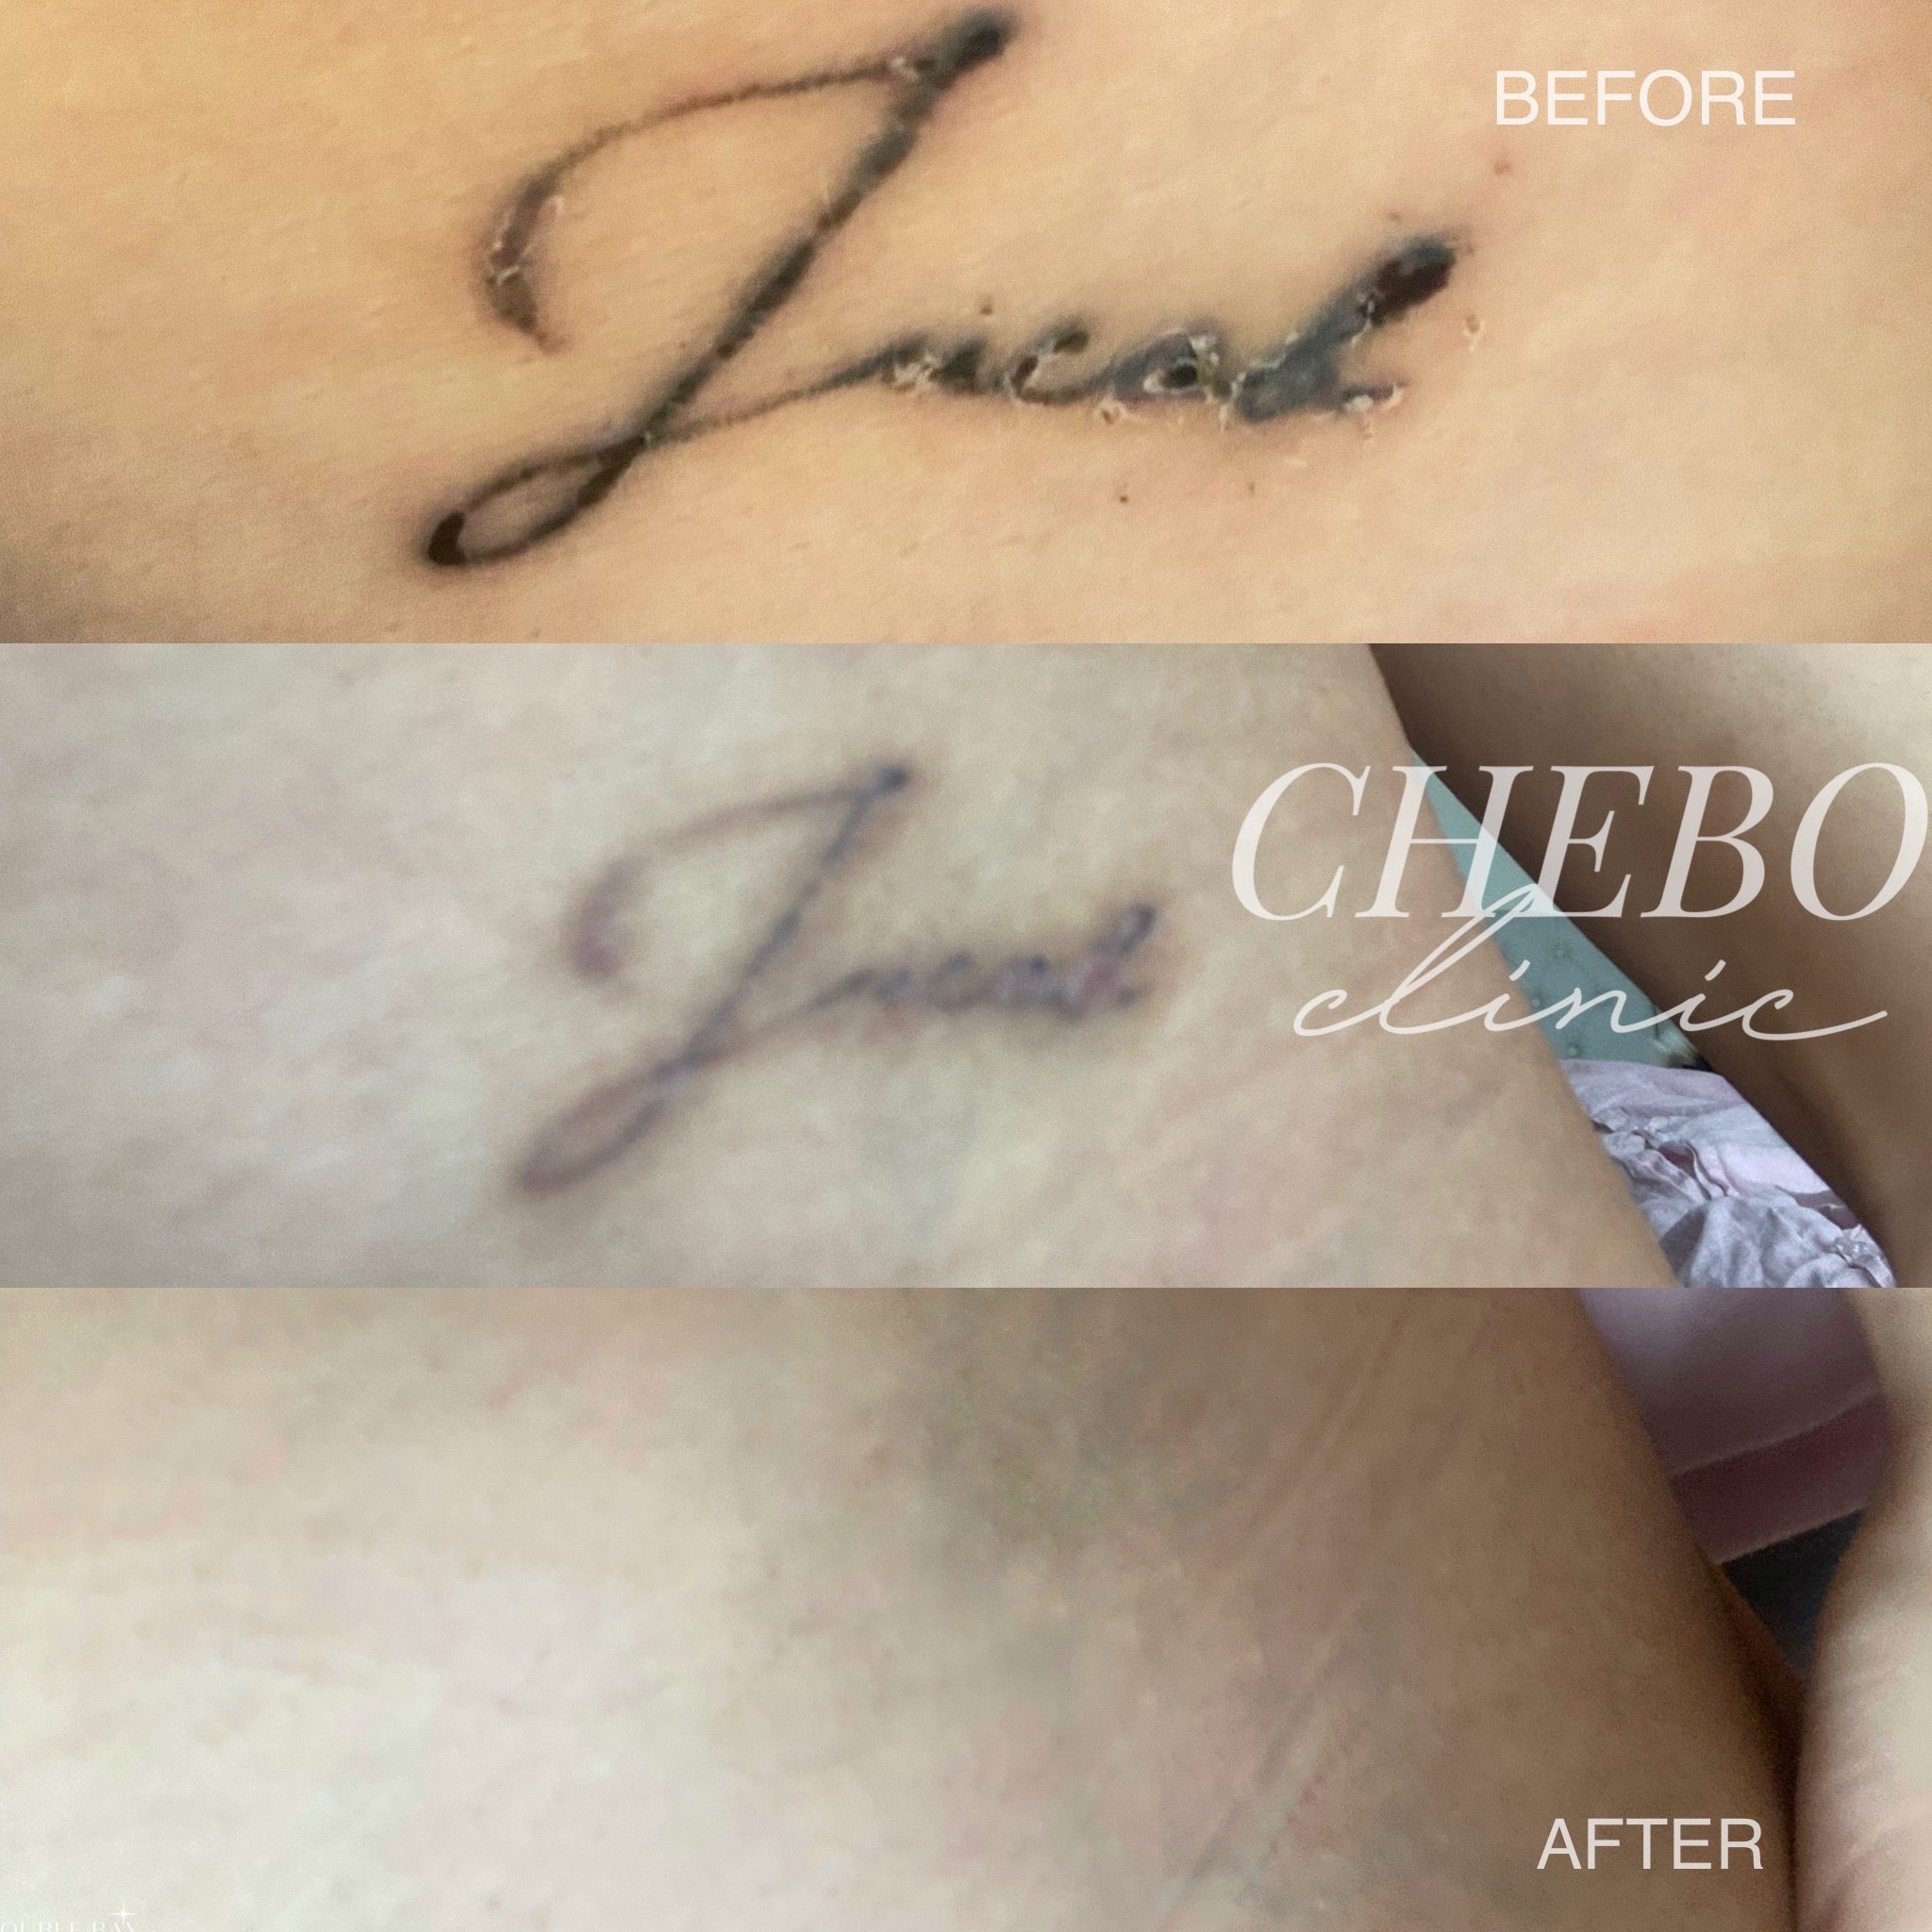 Scar reduction with a fractional laser. One of the first questions people  ask about tattoo removal is will it scar. With a good laser operated by  a... | By Second Skin LaserFacebook